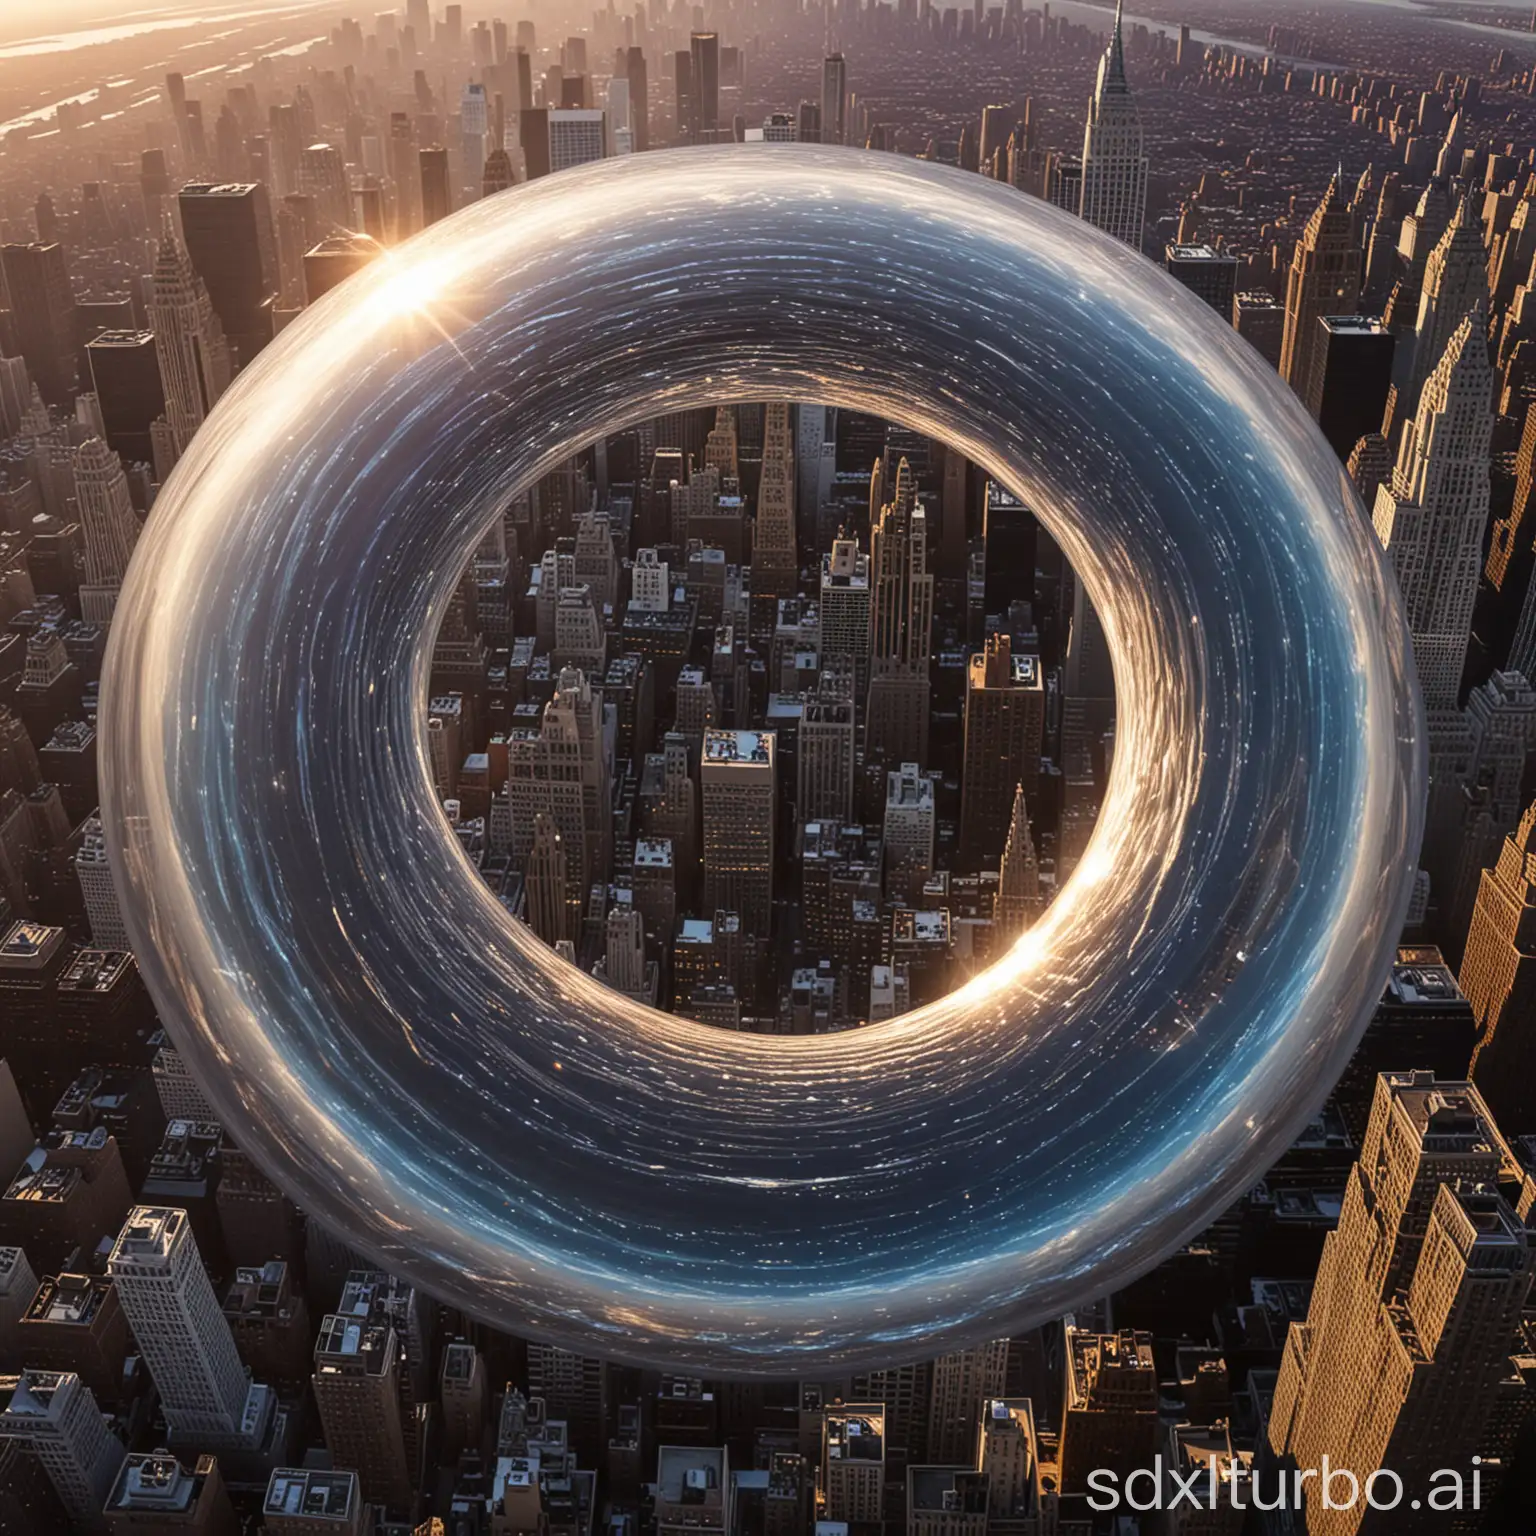 A giant toroidal spaceship is hovering over New York